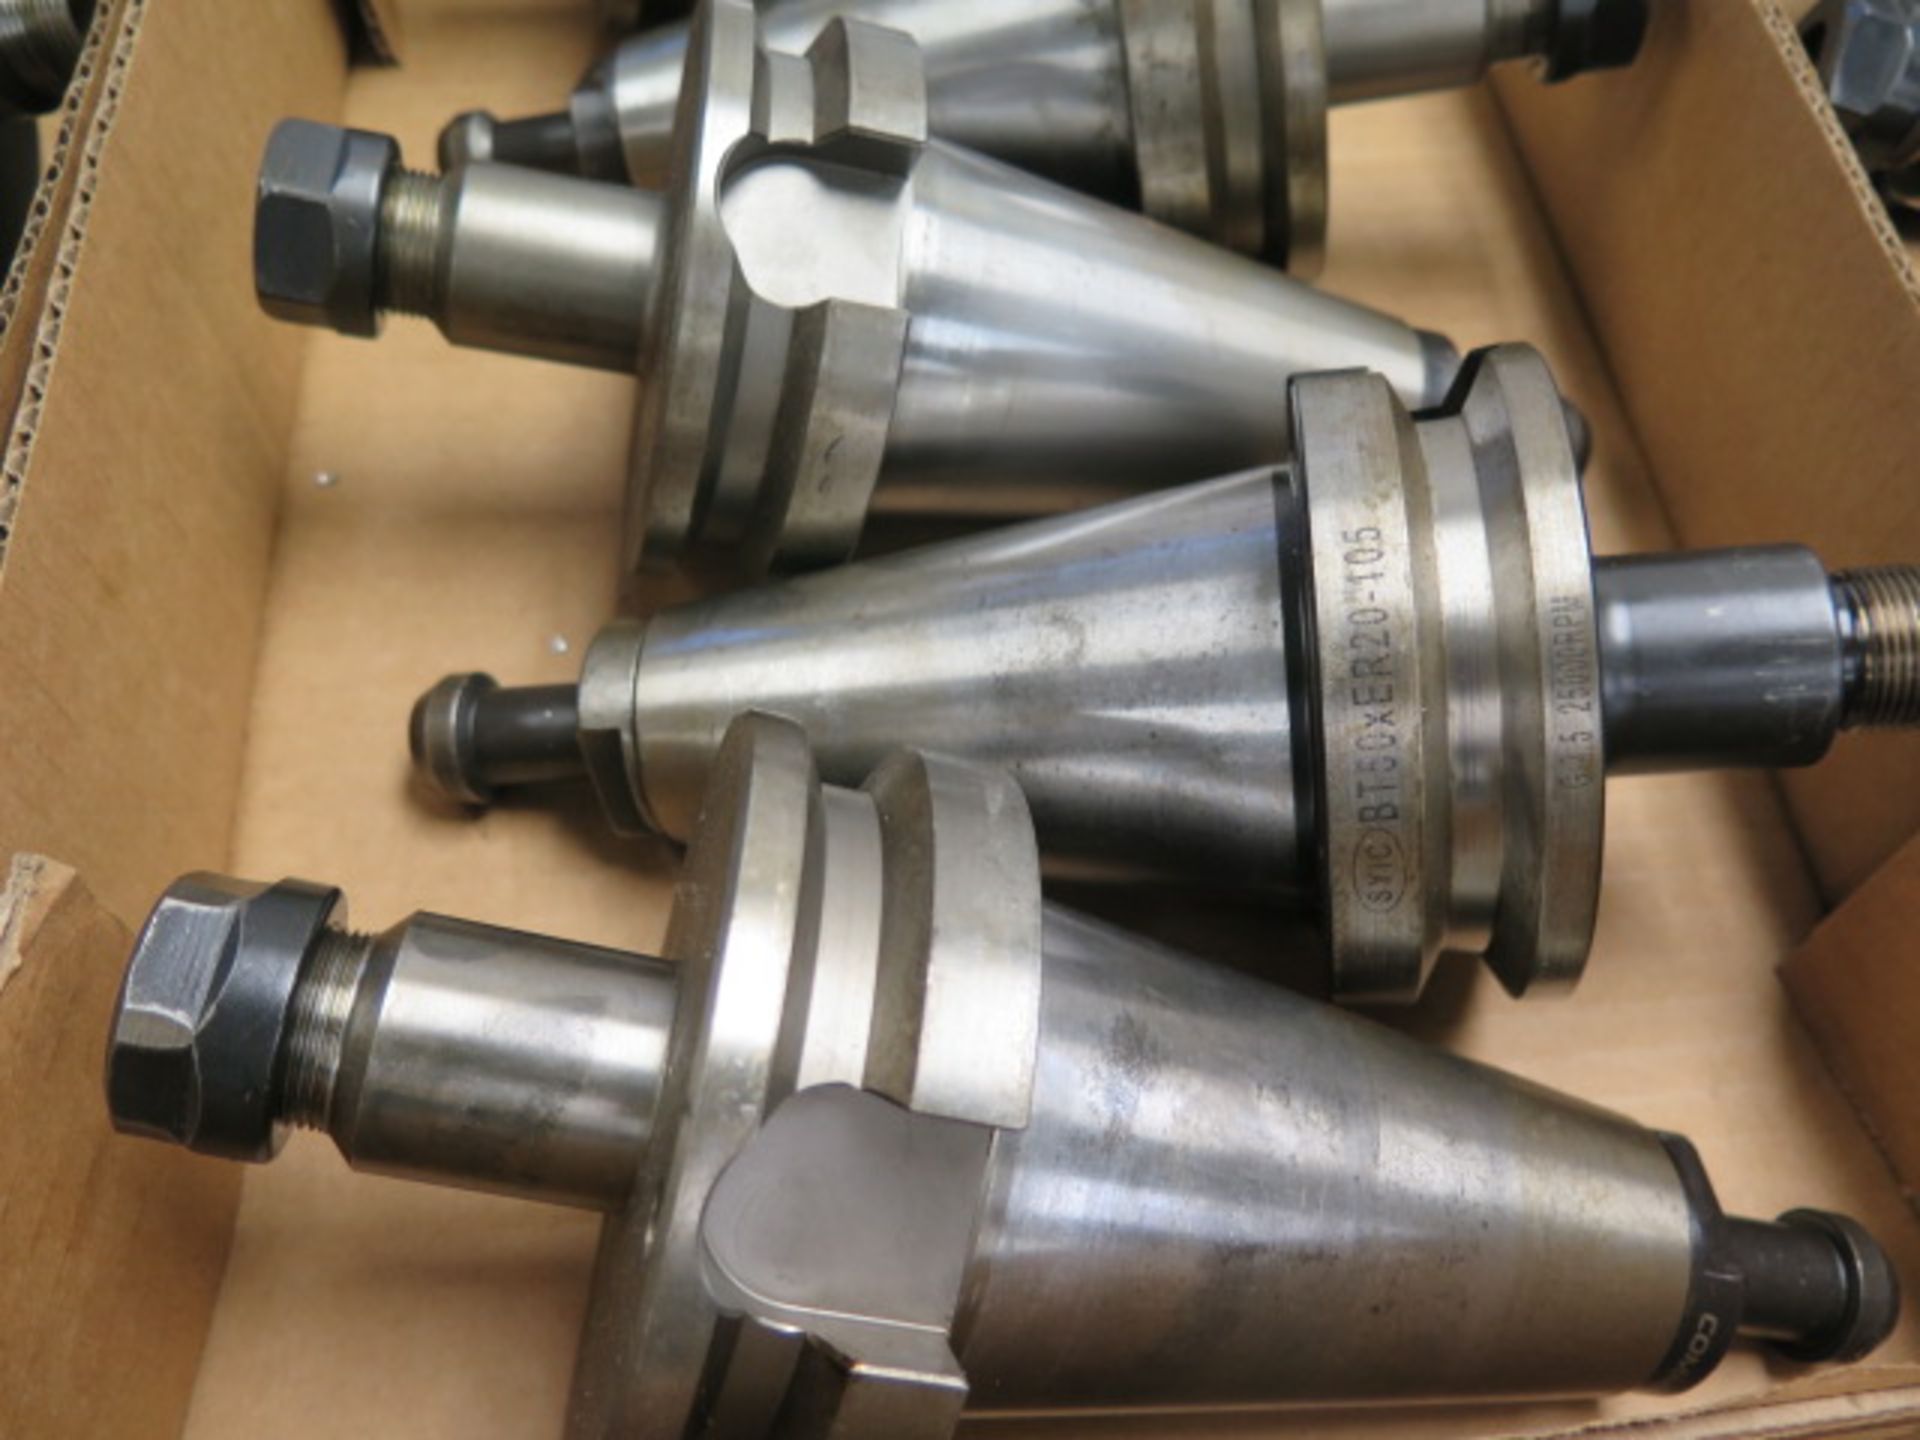 BT-50 Taper ER20 Collet Chucks (5) (SOLD AS-IS - NO WARRANTY) (Located @ 2229 Ringwood Ave. San Jose - Image 4 of 7